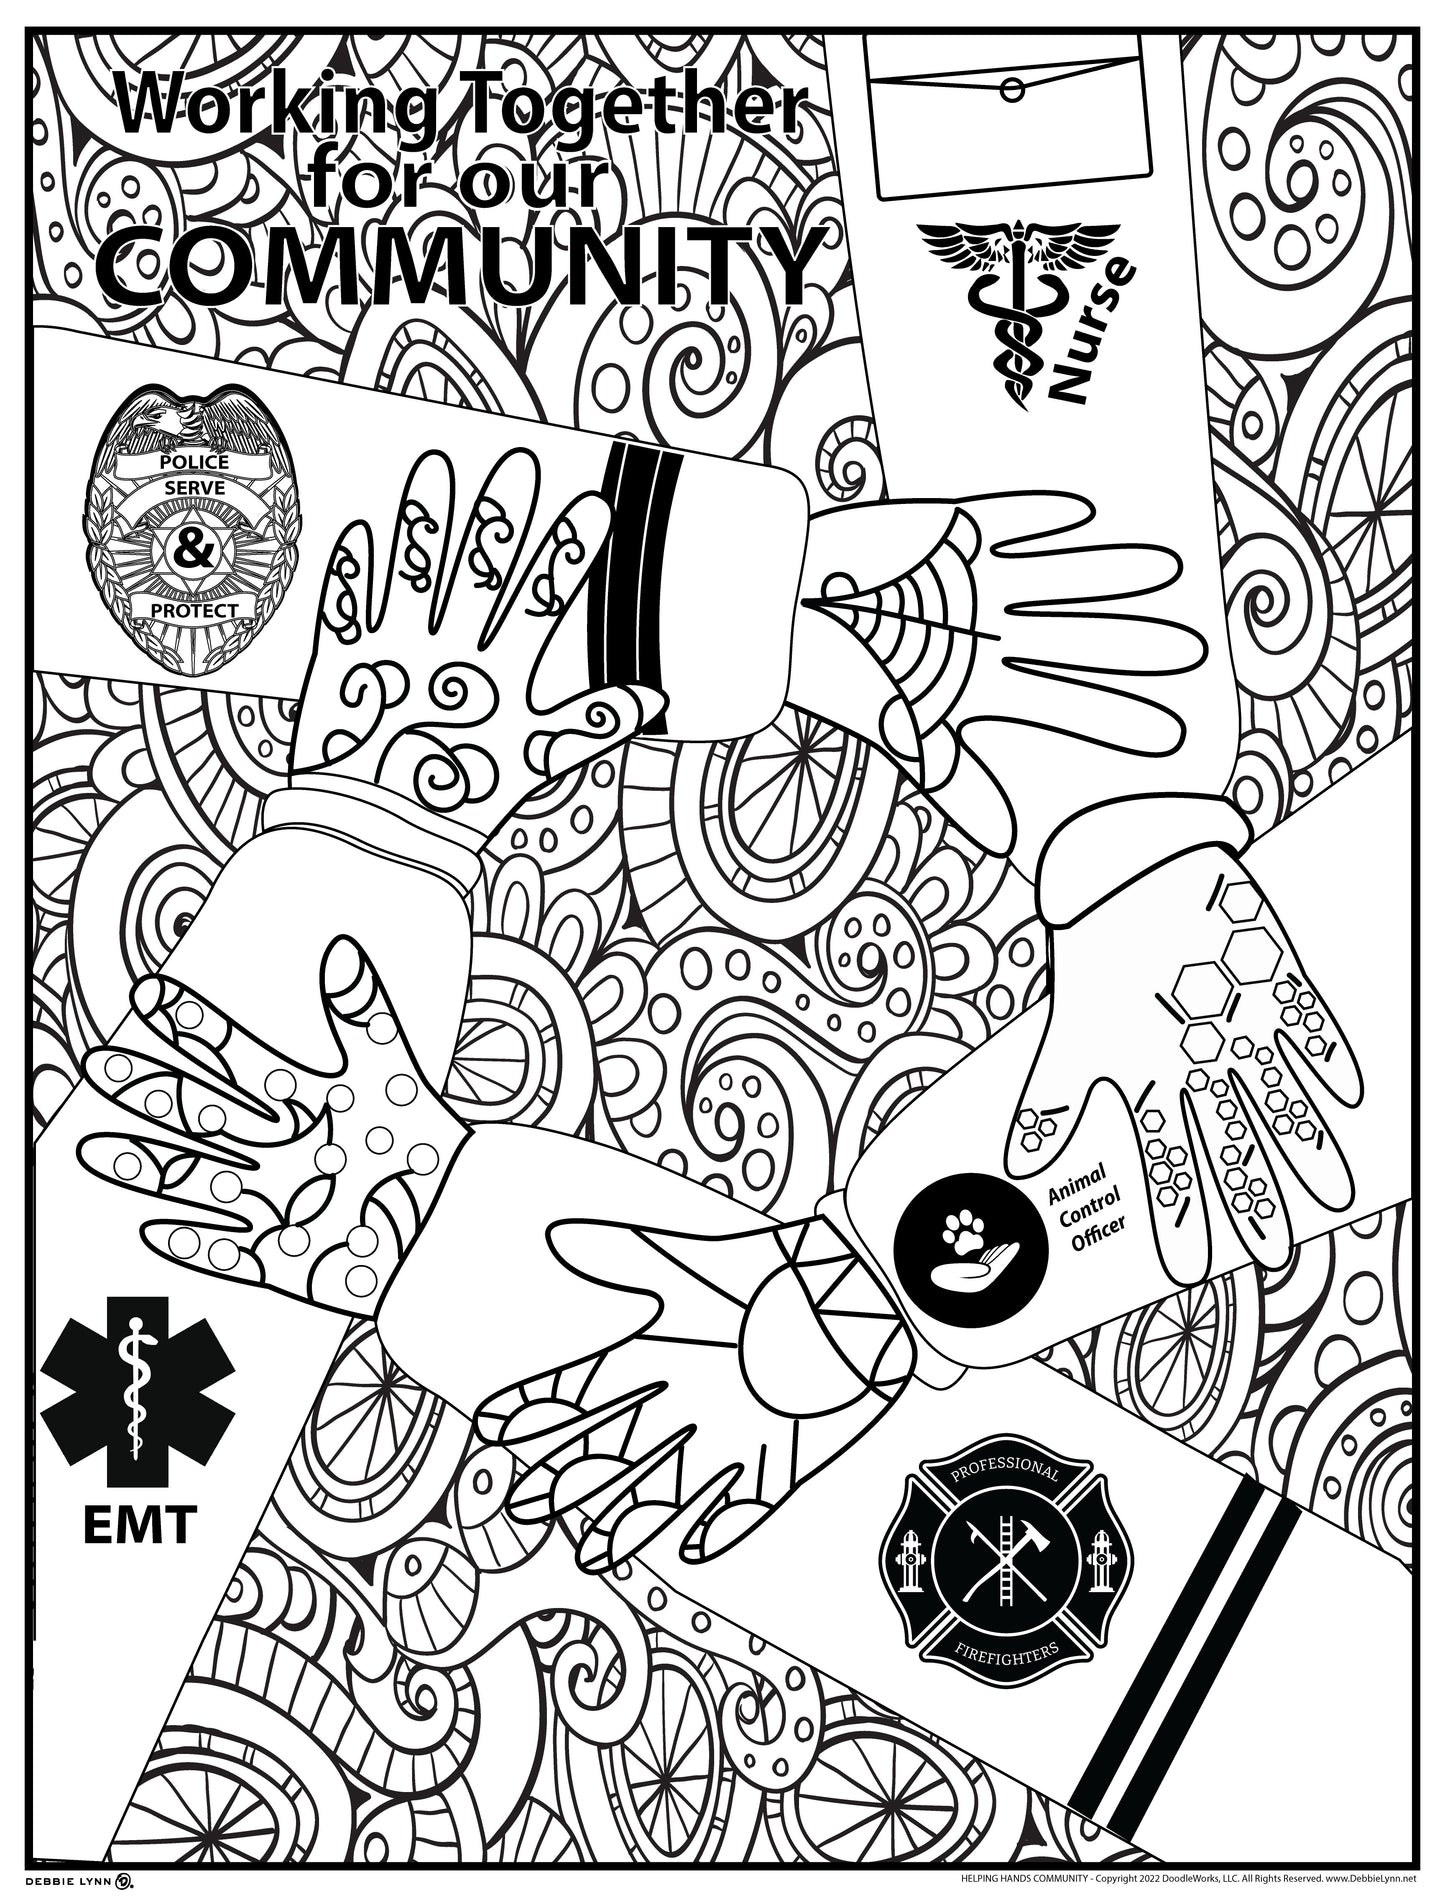 Helping Hands Community Personalized Giant Coloring Poster 46"x60"